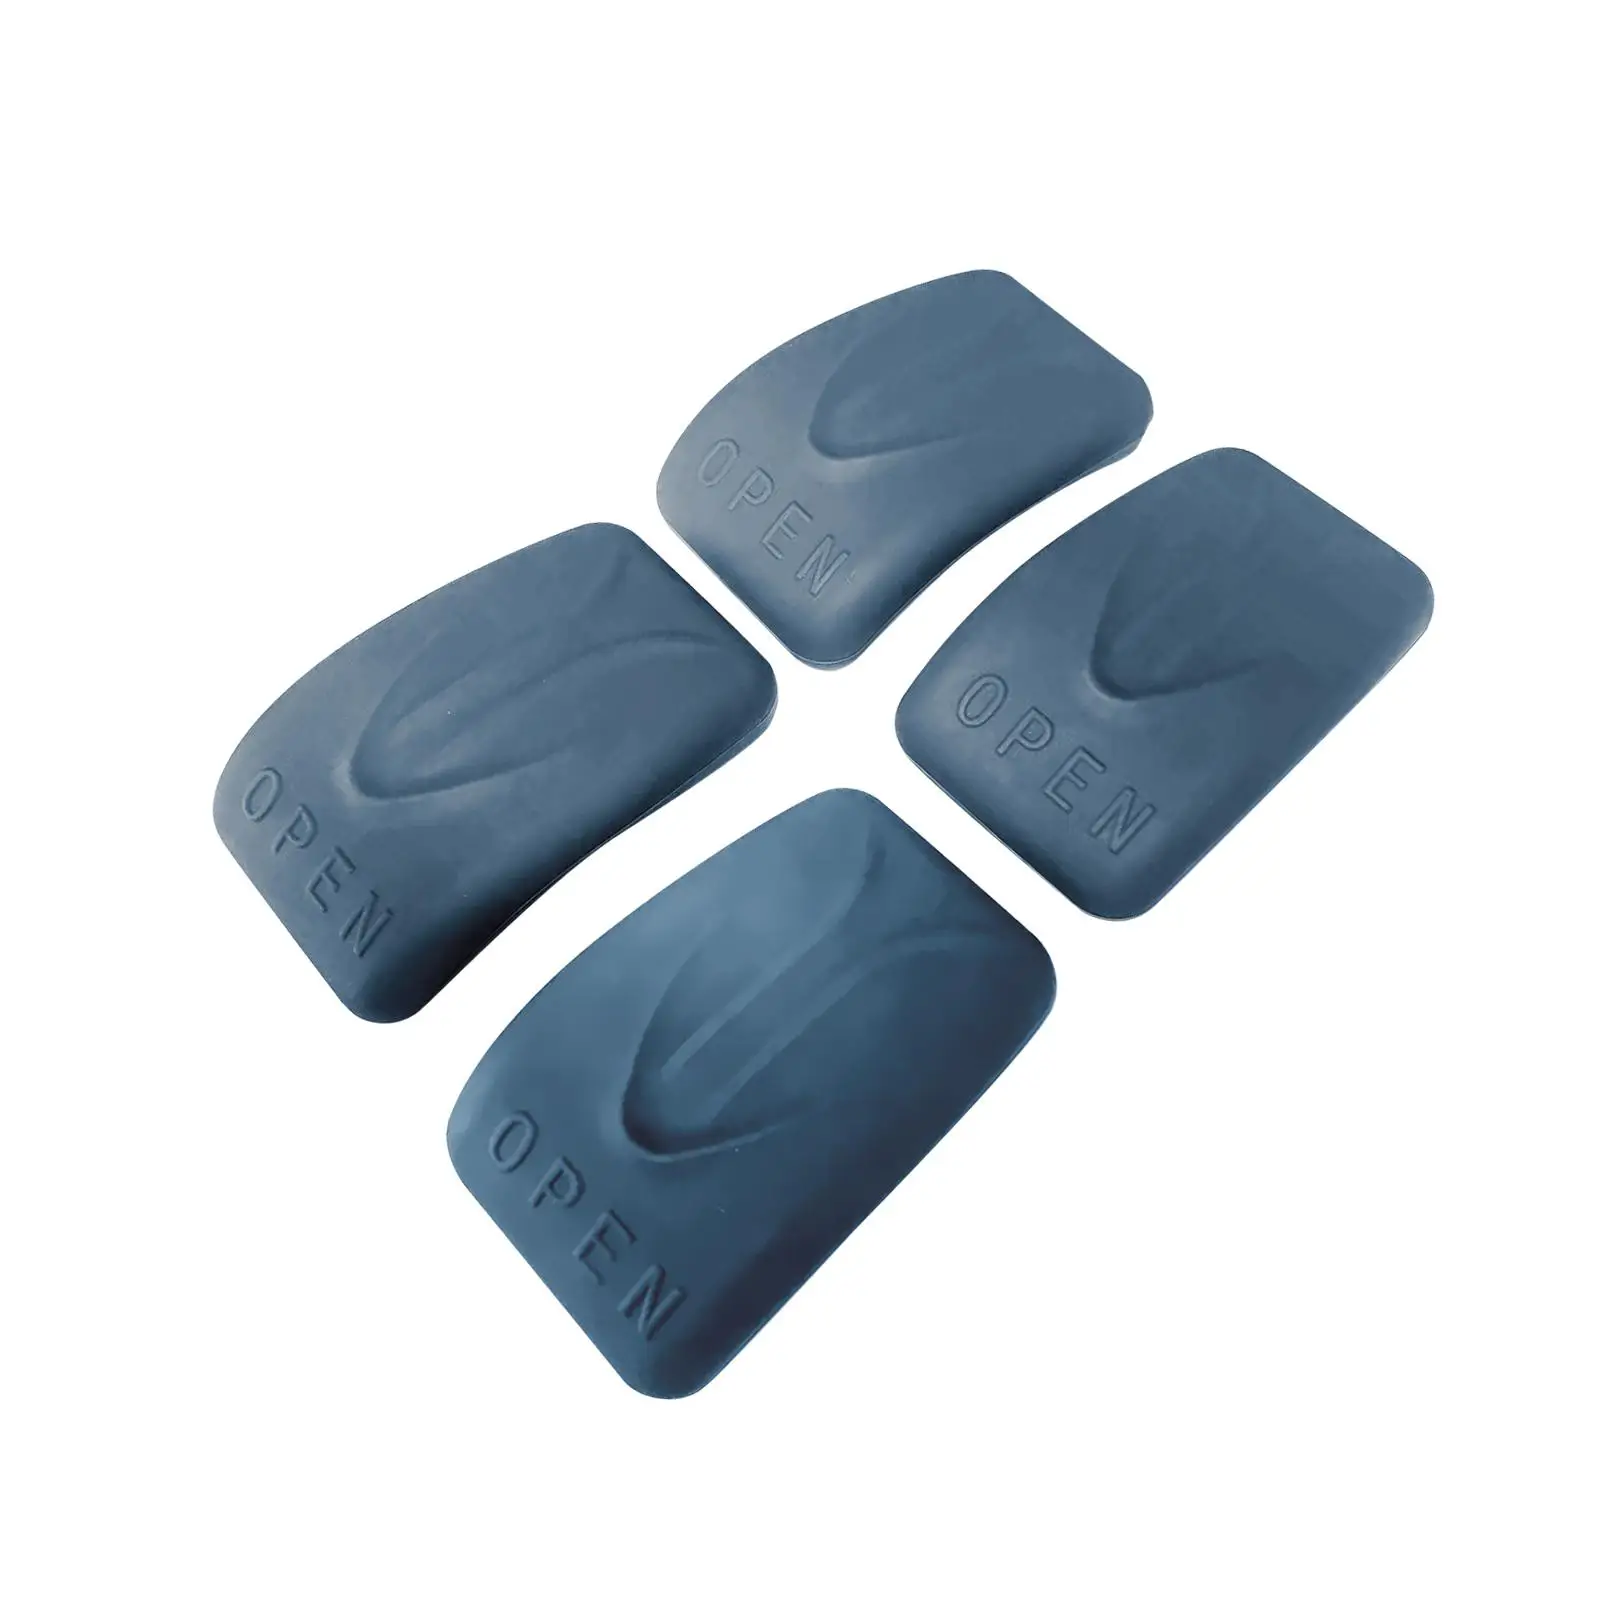 4x Auto Door Handle Protective Covers Easy to Install for Byd Yuan Plus